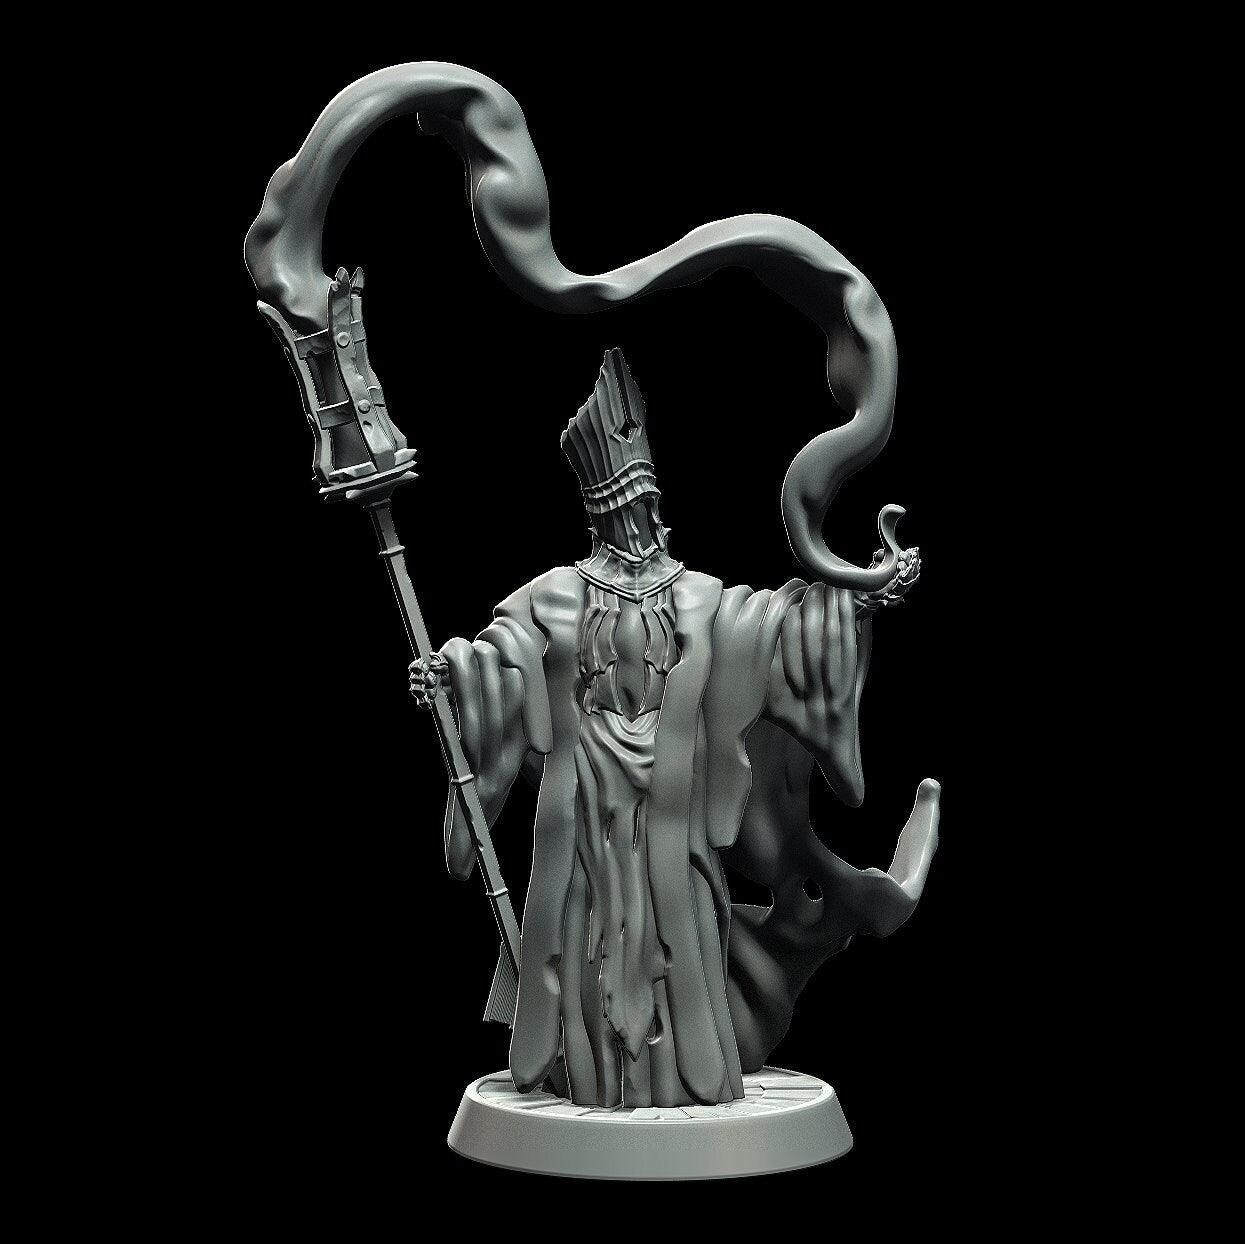 Insane Cleric Miniature witch miniature - 3 Poses - 28mm scale Tabletop gaming DnD Miniature Dungeons and Dragons,dnd 5e - Plague Miniatures shop for DnD Miniatures